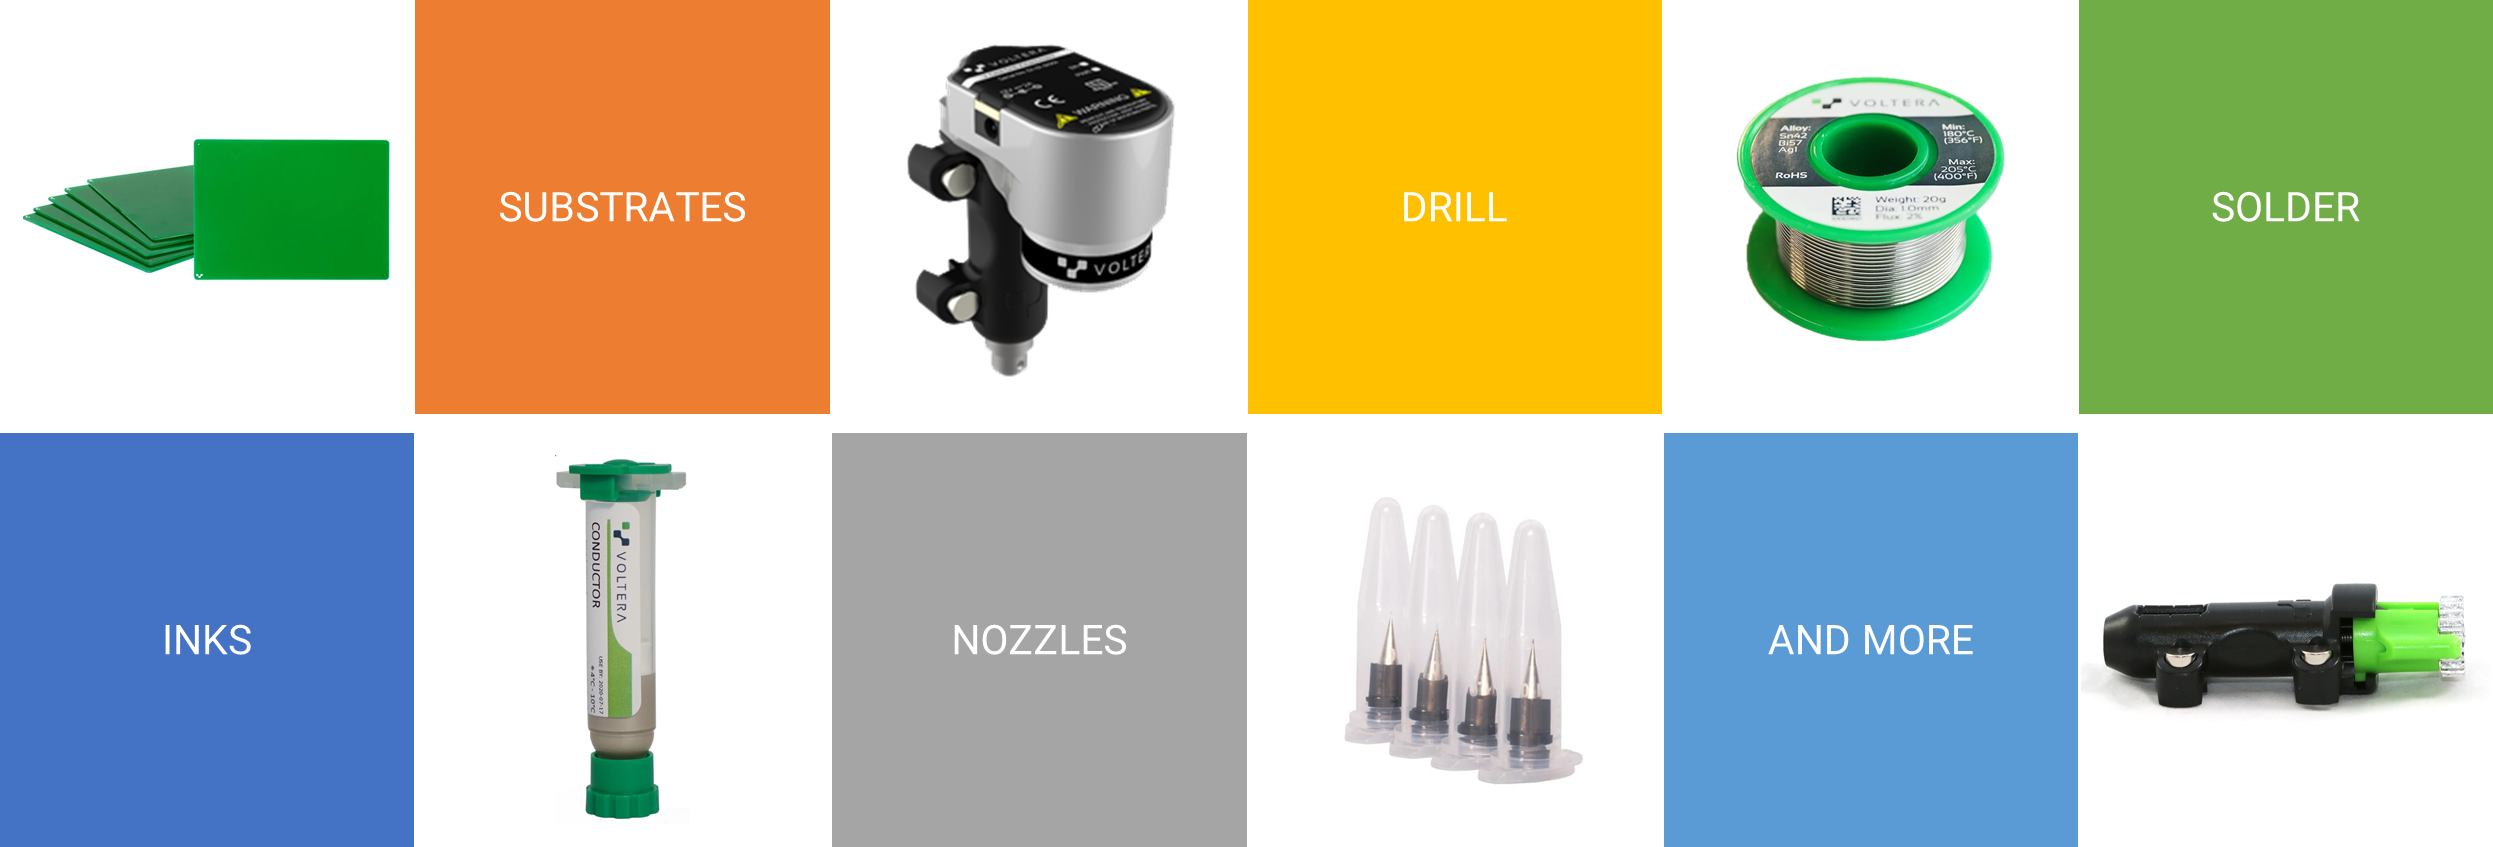 ACCESSORIES AND CONSUMABLES